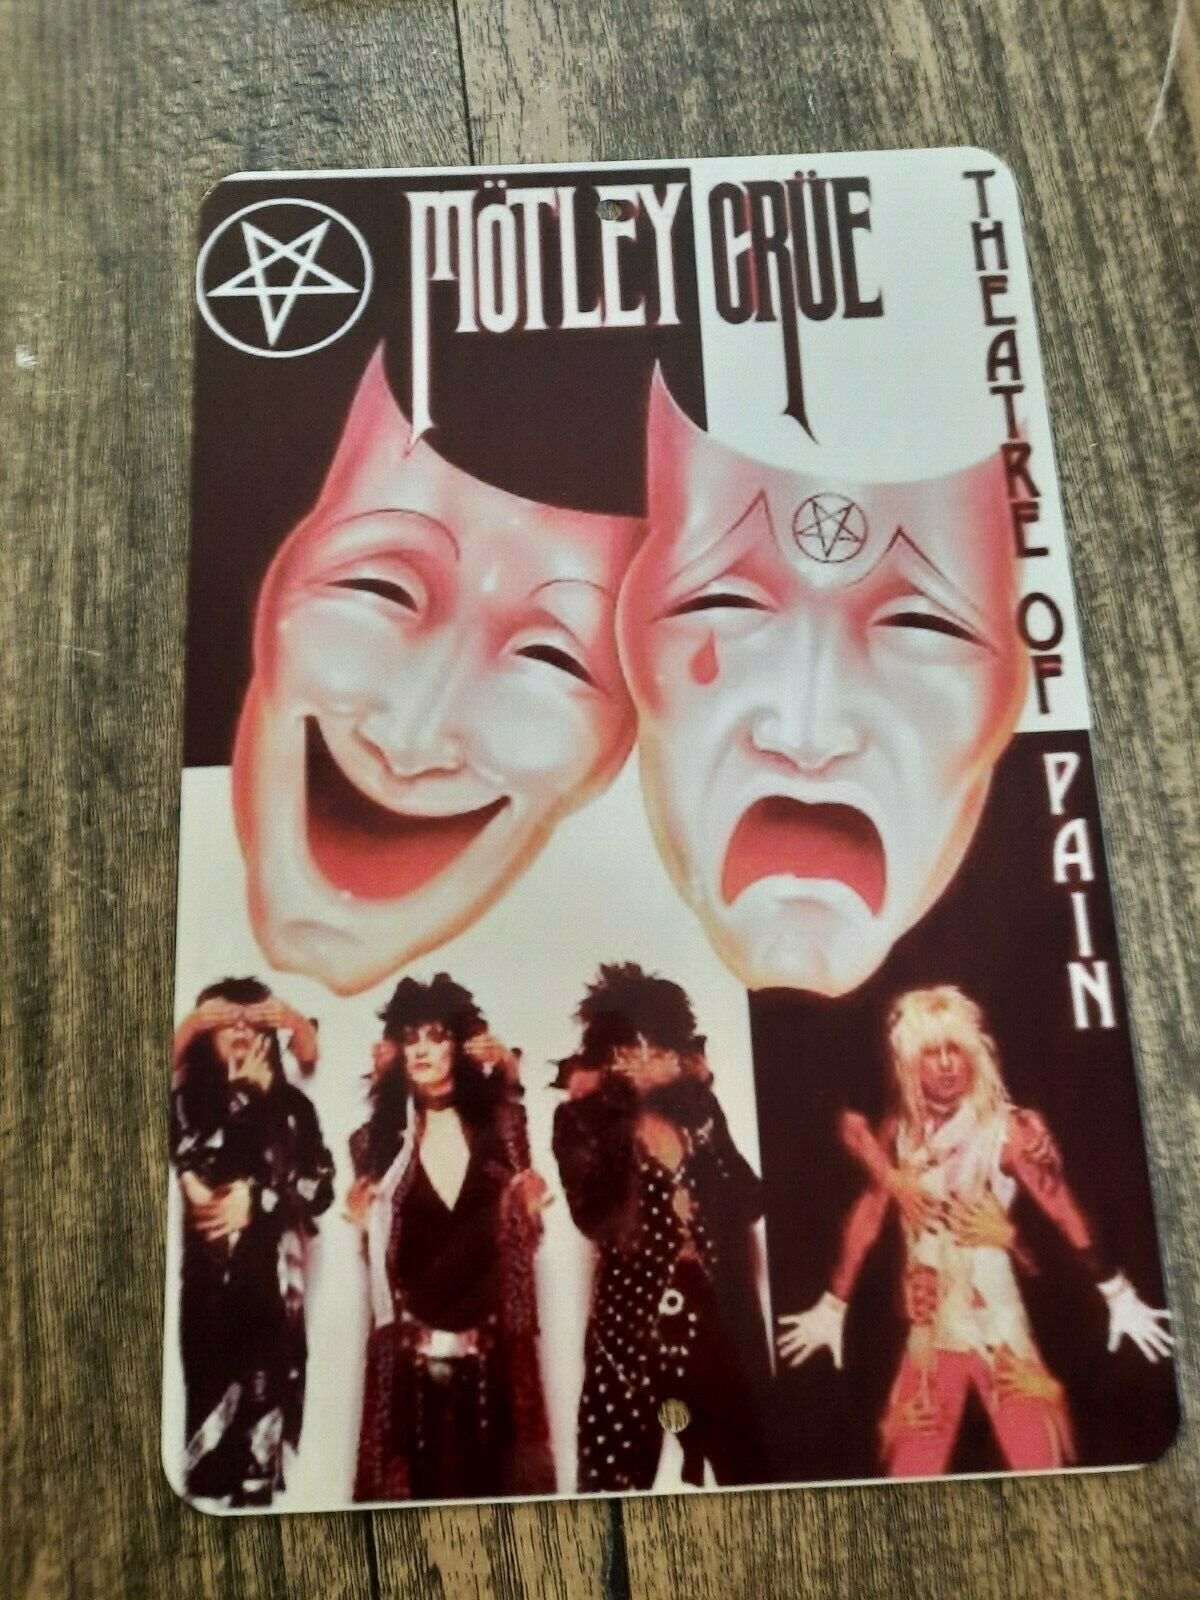 Motley Crue Theater of Pain 8x12 Metal Wall Sign Music